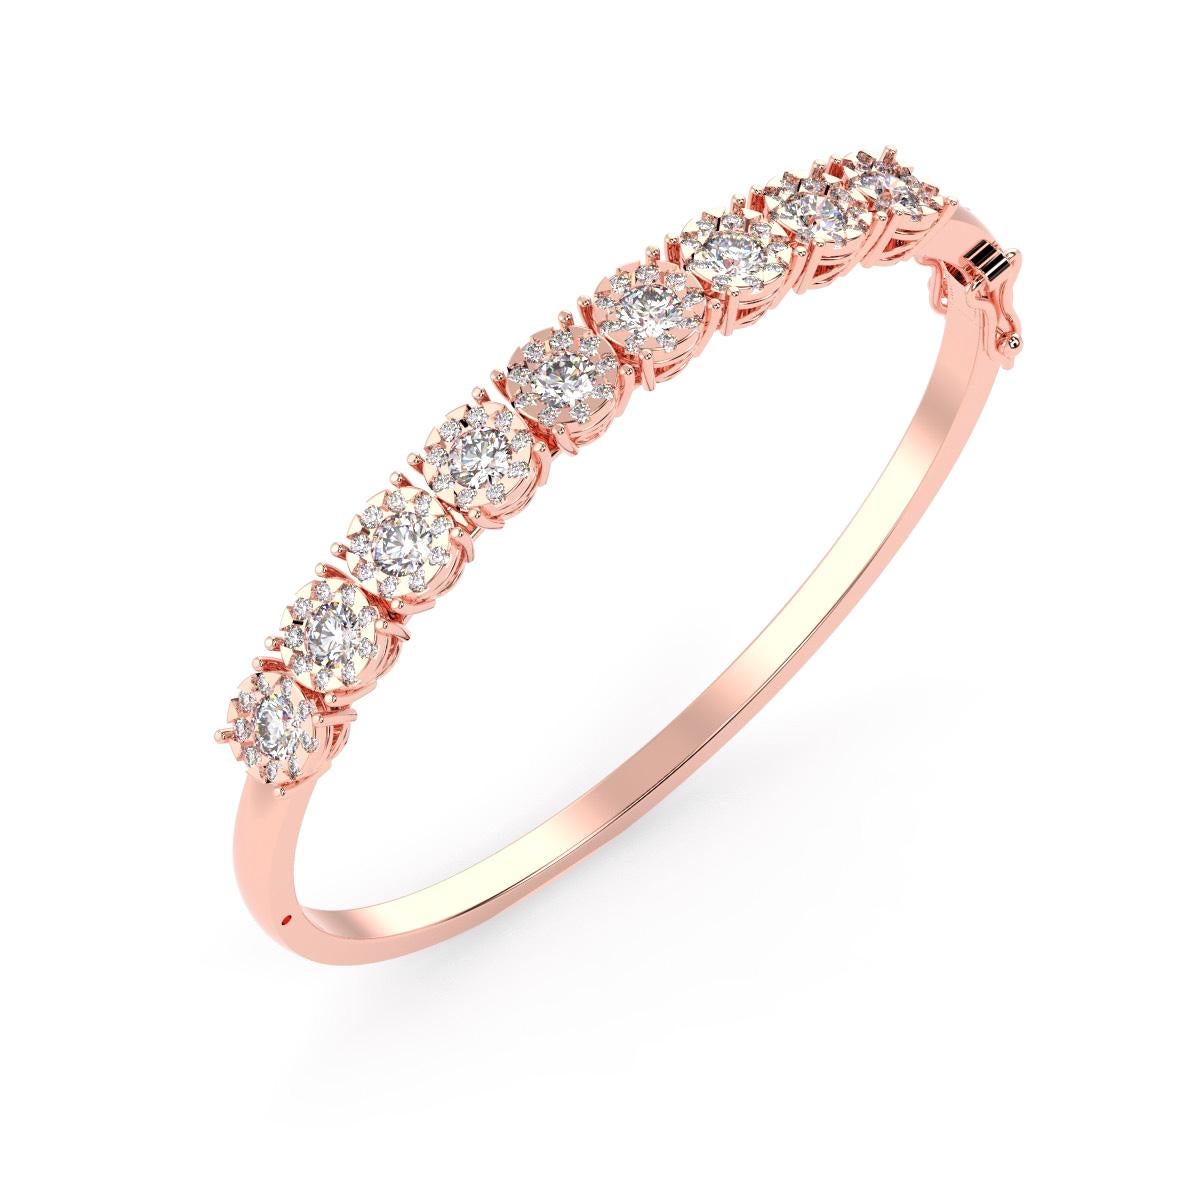 This diamond bangle showcases petite round diamonds Micro Prong-set in 14k rose gold for a total carat weight of 5.00 carats. The diamonds are set along the top half of this hinged bangle.

Product details: 

Center Gemstone Type: NATURAL